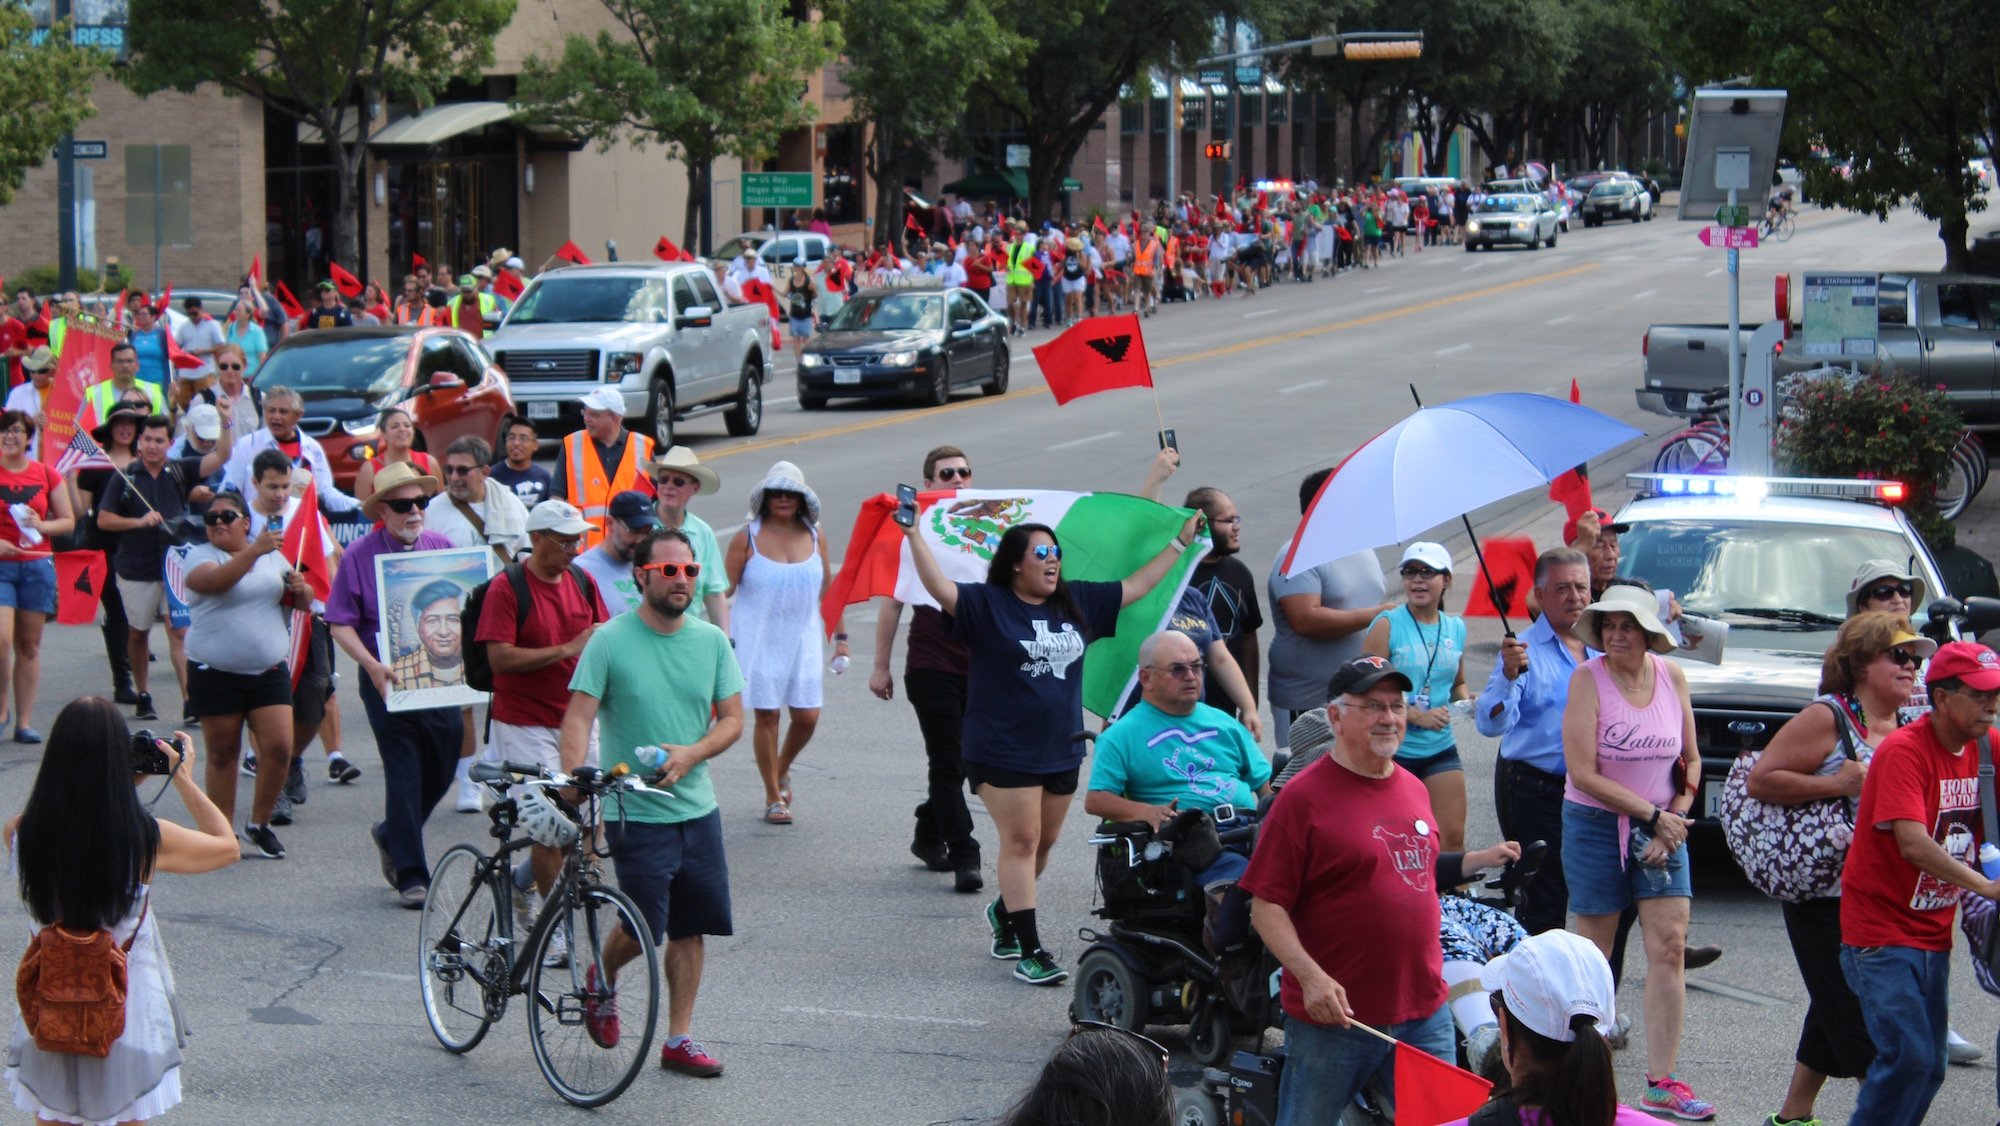 Hundreds of demonstrators walked four miles from St. Edward's University to the Texas Capitol, partially following in the footsteps of marching labor strikers in 1966.